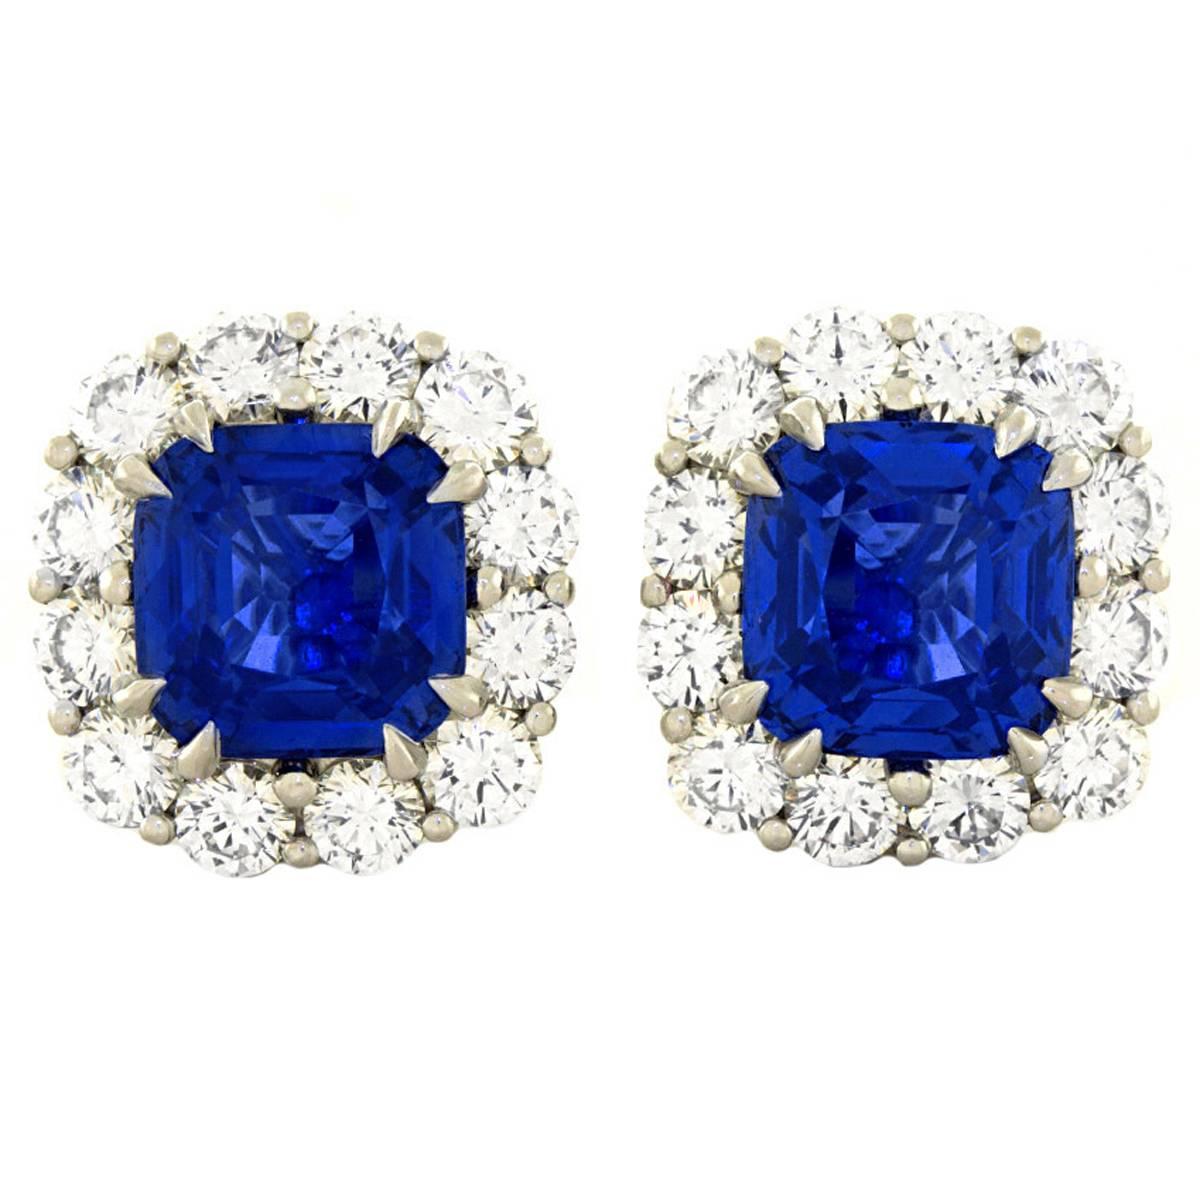 No Heat Sapphire and Diamond Earrings in Platinum AGTA Certificate